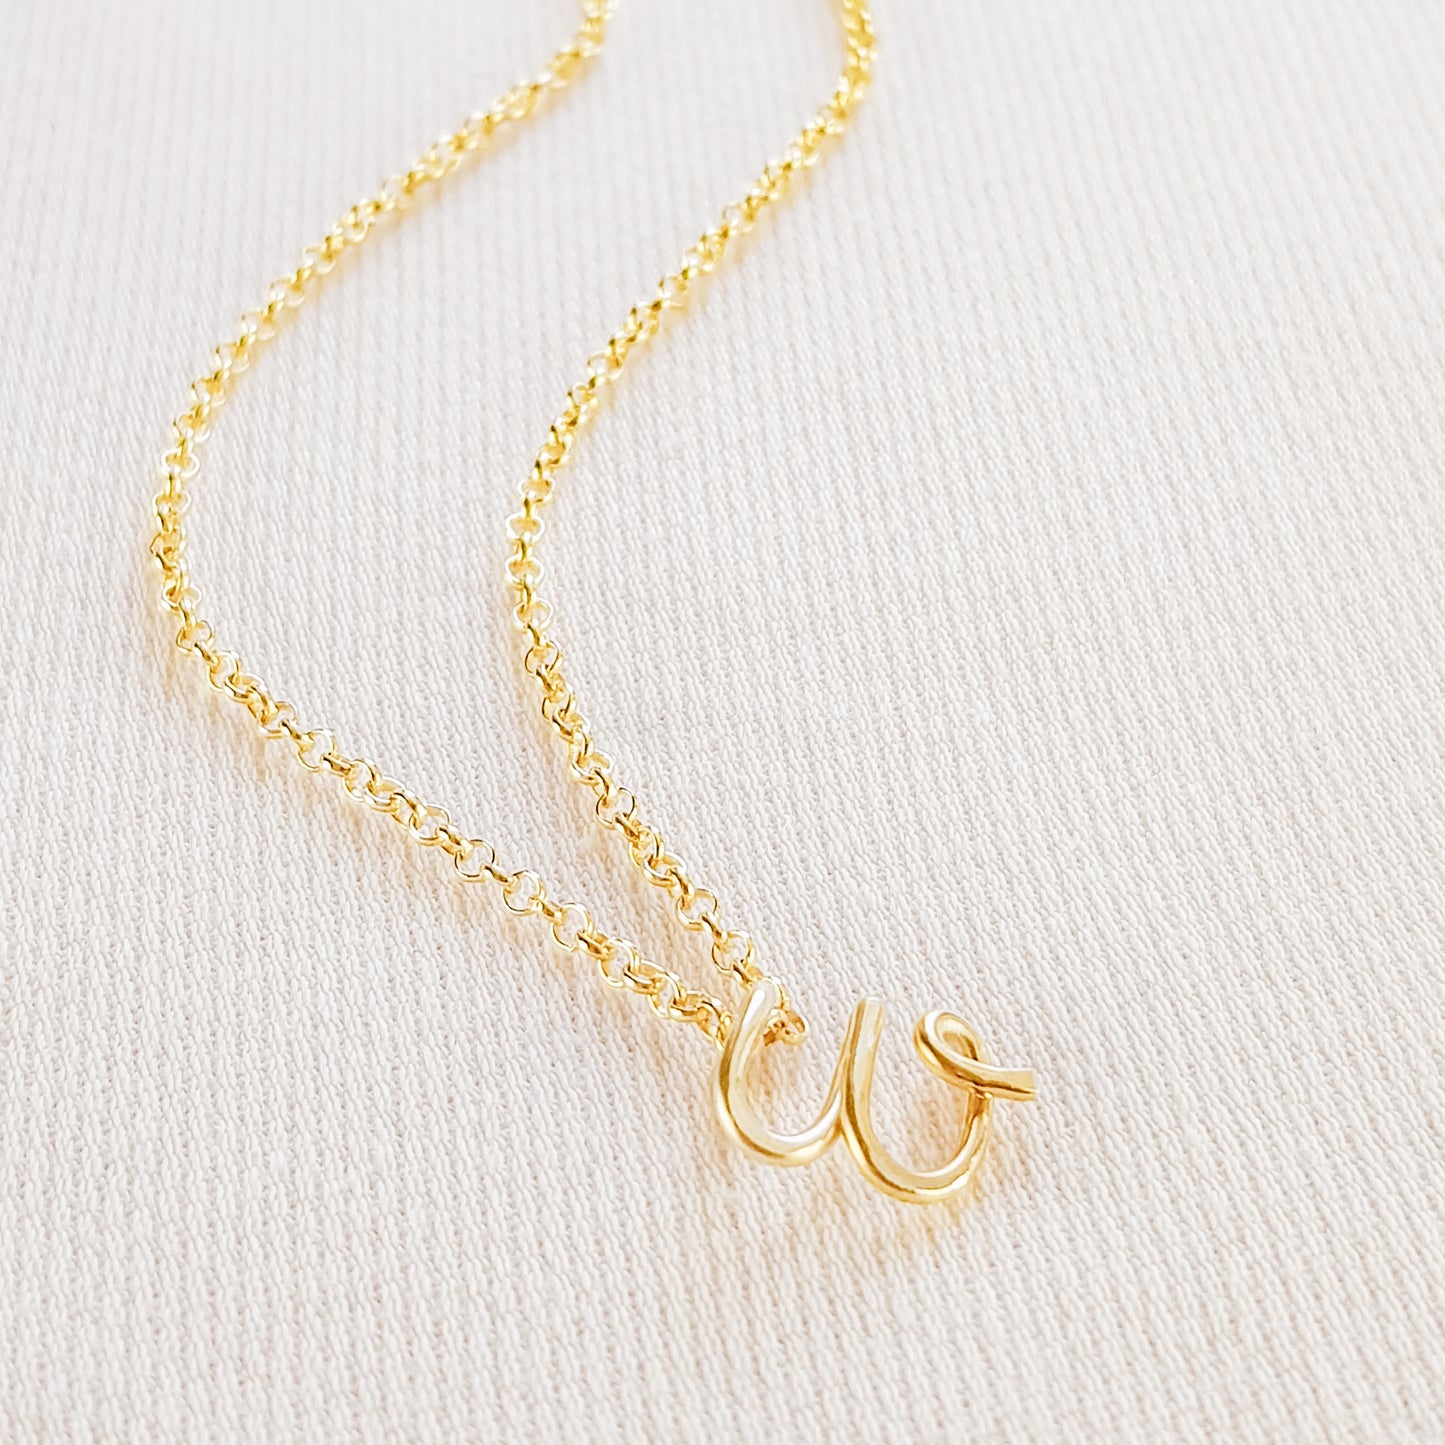 H Initial Necklace • Personalized Name Necklace • Letter Necklace • Gold Necklace • Wife Gifts • Gifts For Mom • Moms Gift • Birthday Gift